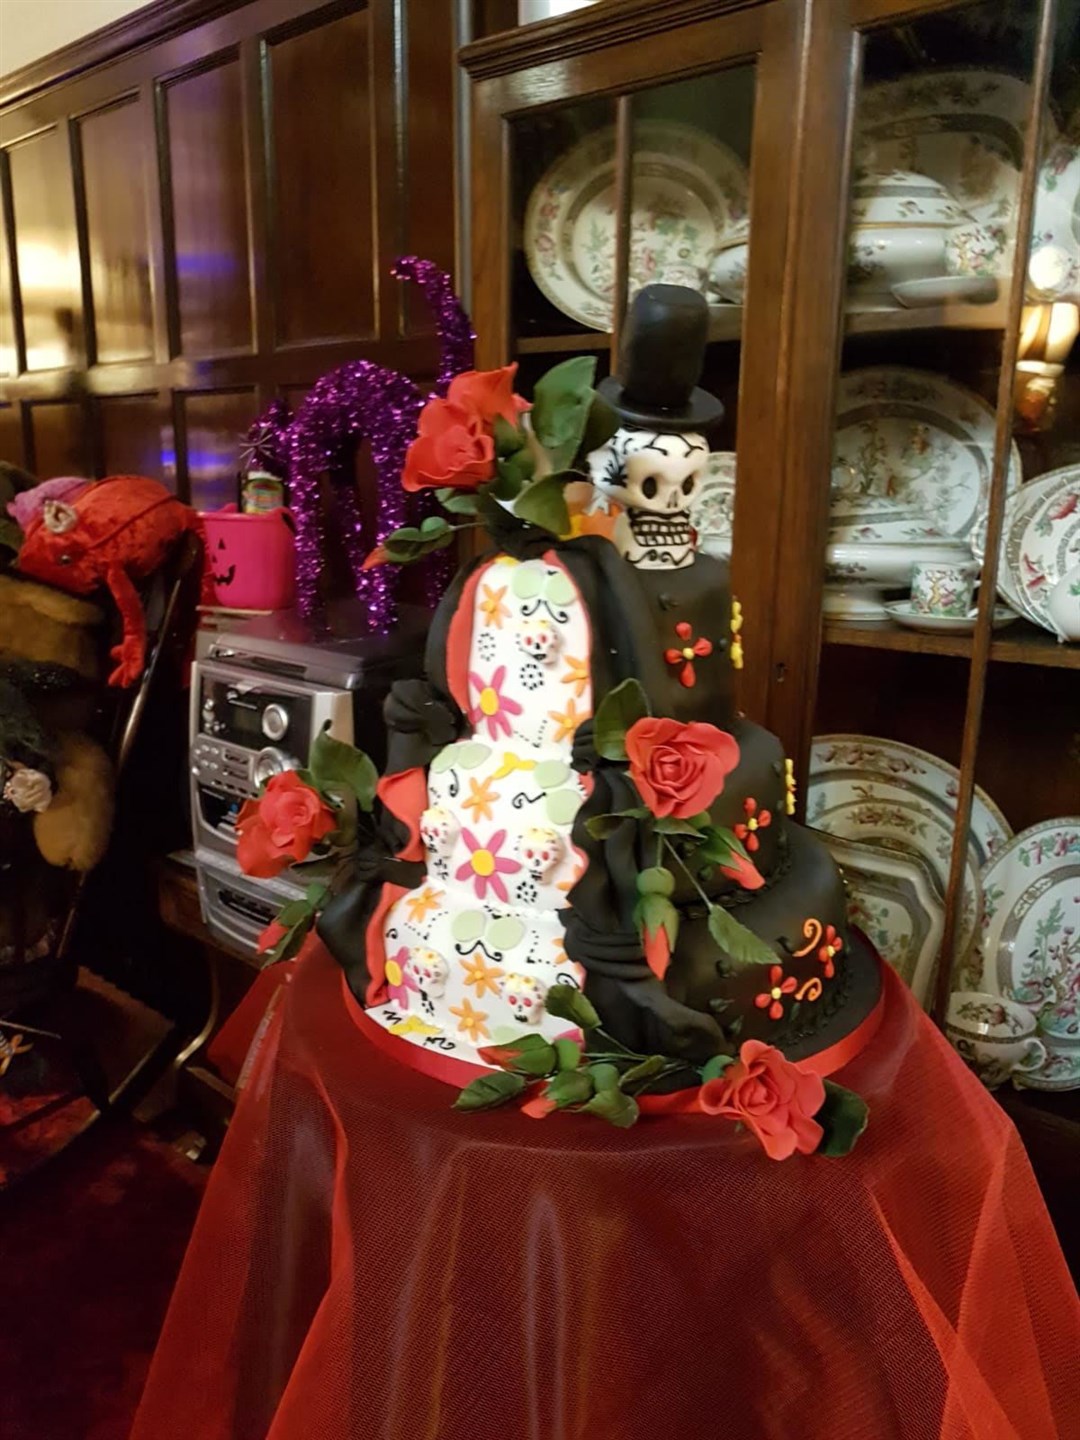 The amazing Day of the Dead cake, made by one of Gaye’s colleagues, was adorned with sugar skulls and roses.